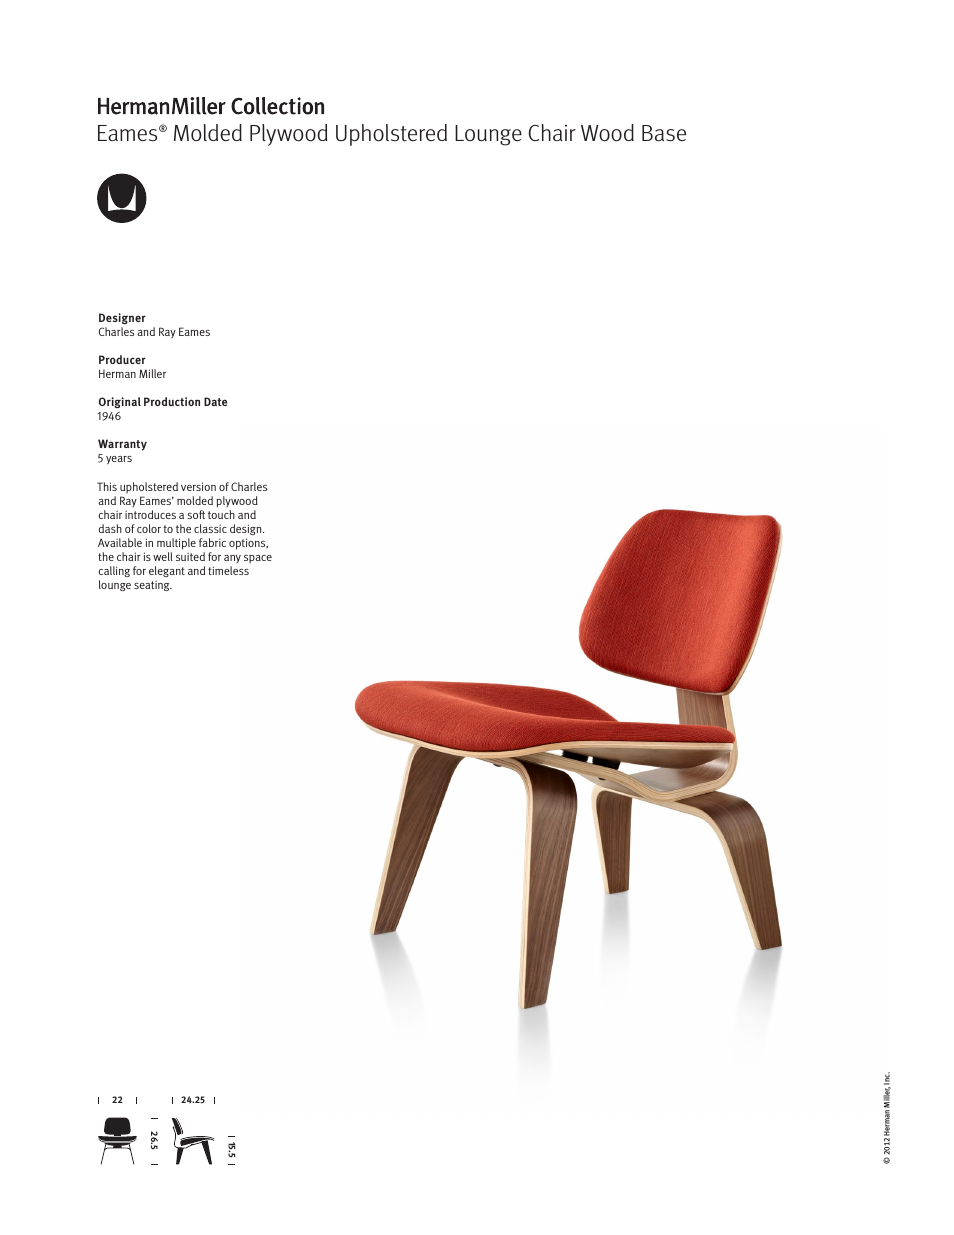 Eames Molded Plywood Upholstered Lounge Chair Wood Base - Product sheet